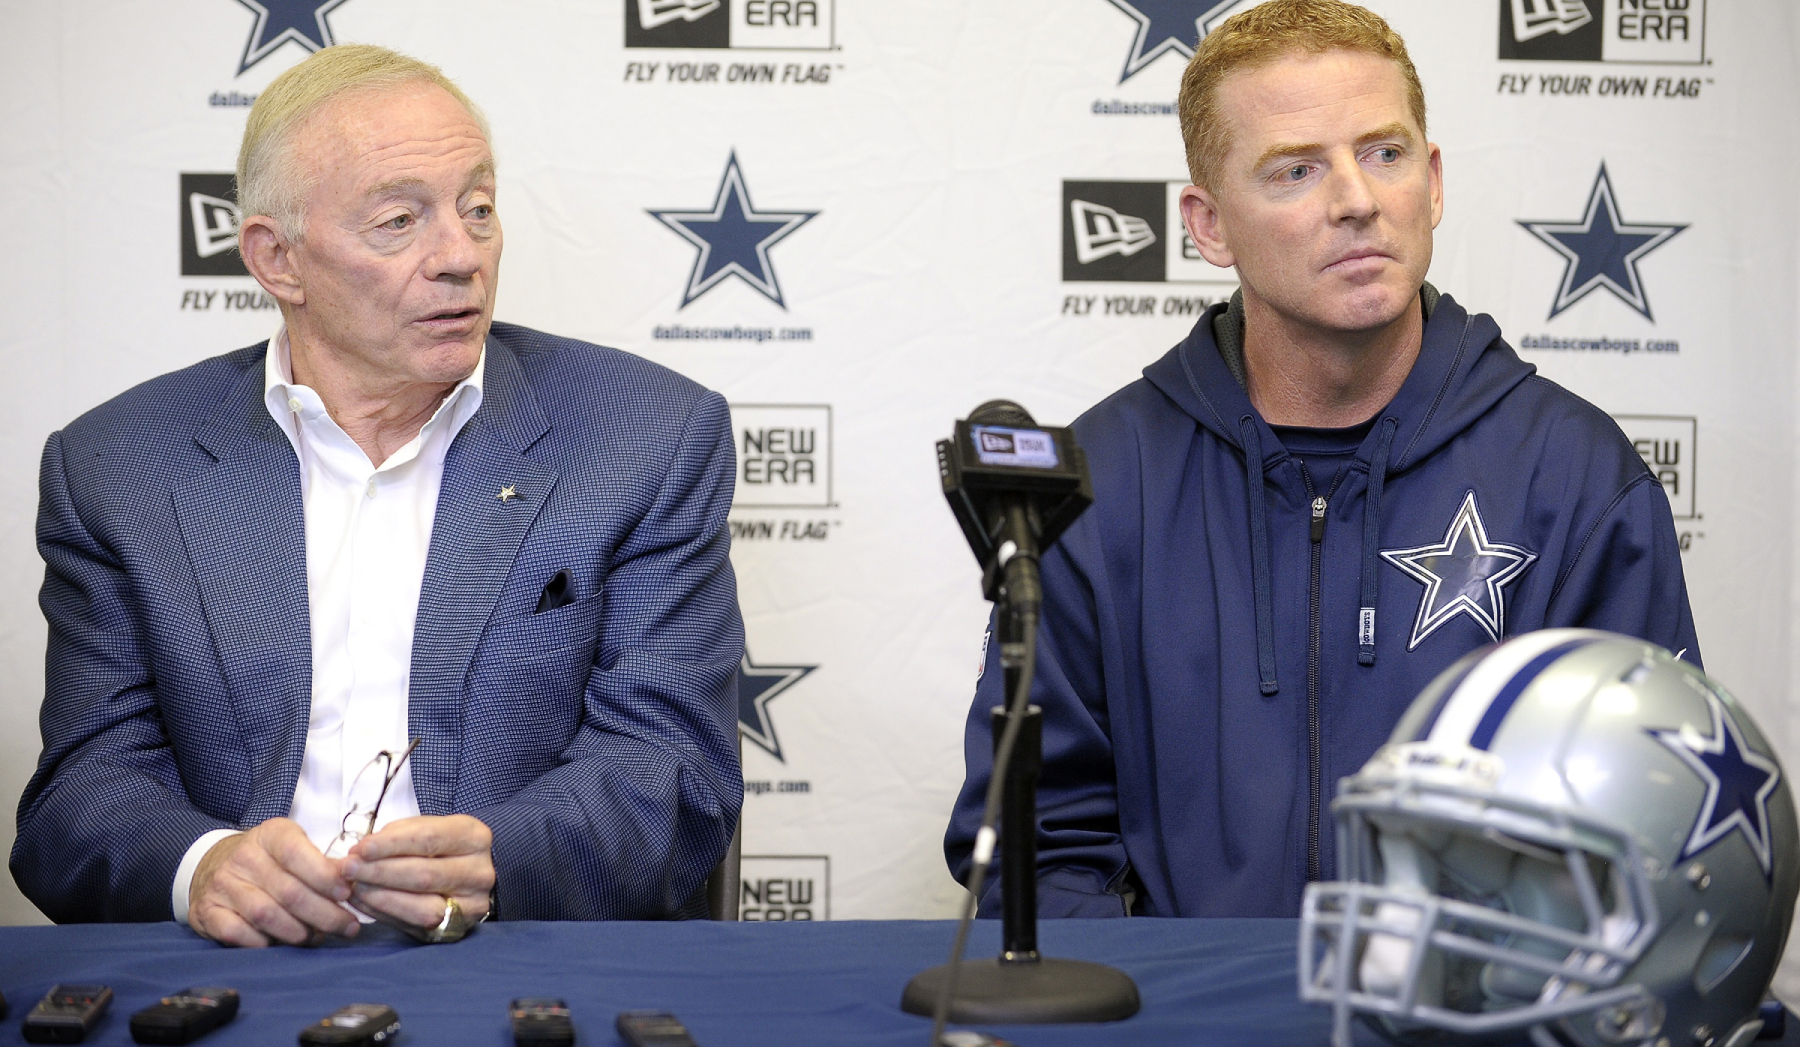 Jason Garrett was the Cowboys coach for over nine seasons. Mike McCarthy is now the coach but Jerry Jones just took a subtle shot at Garrett.